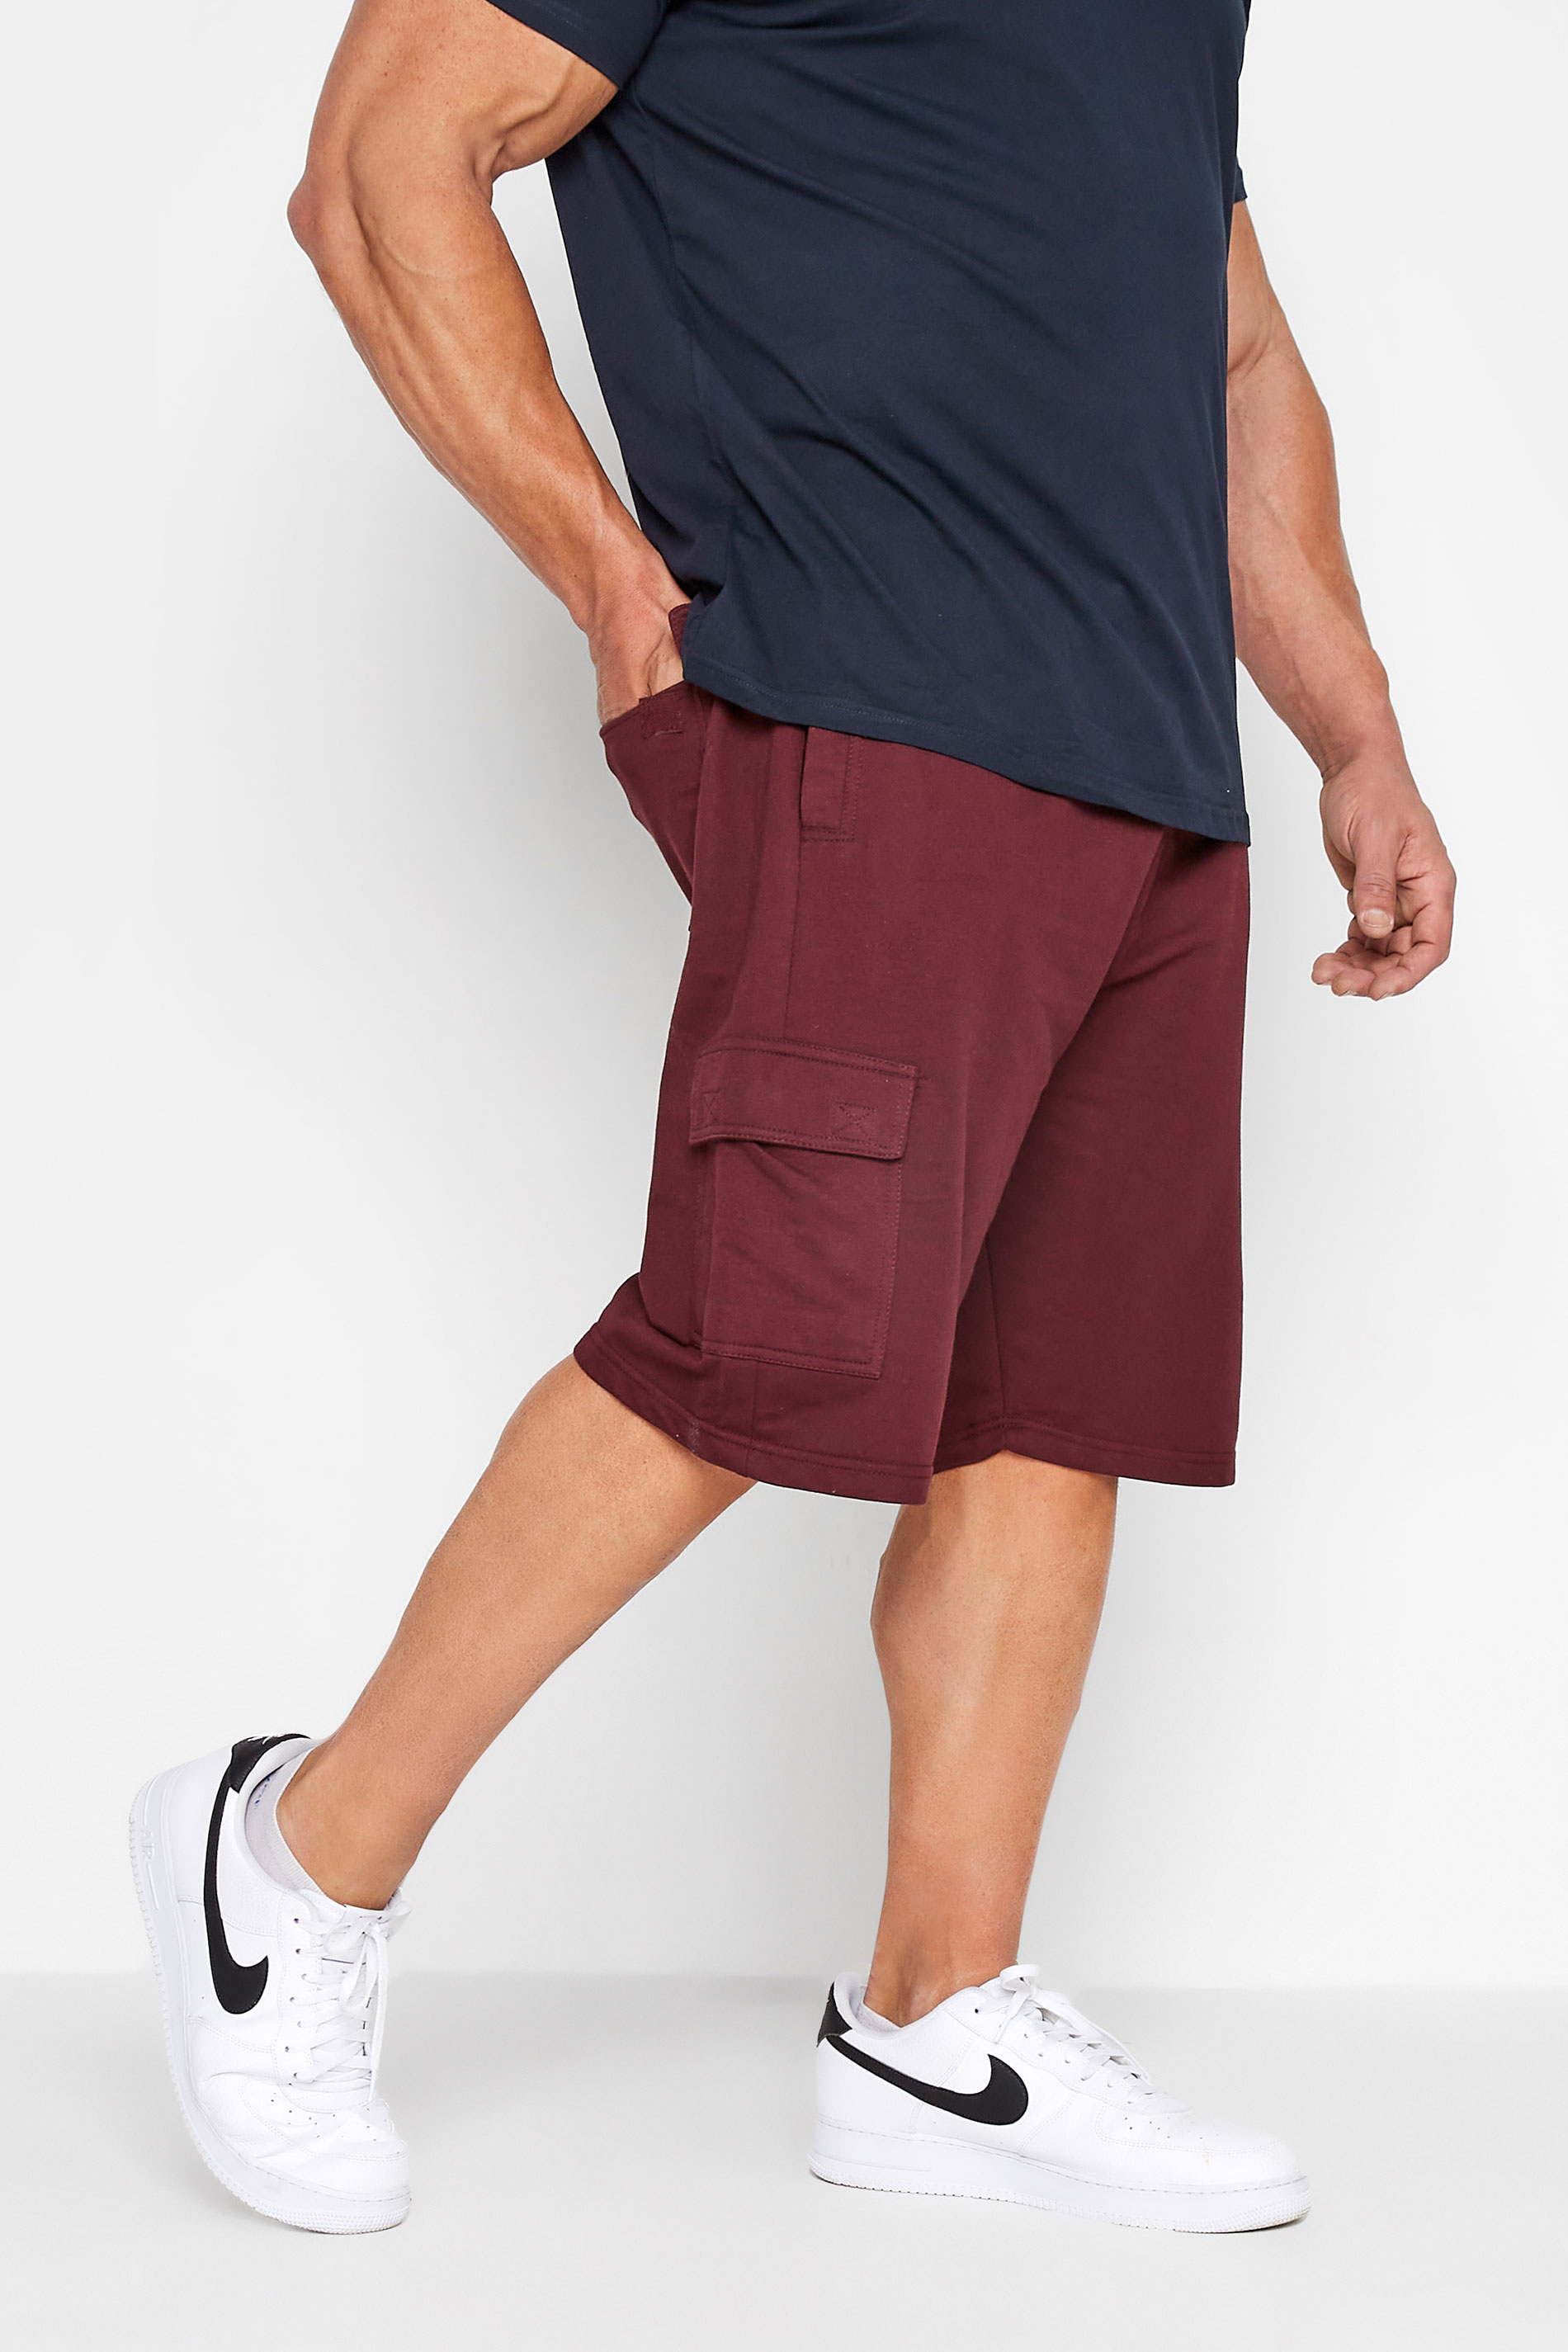 Image of Size 2Xl Mens Kam Big & Tall Burgundy Red Cargo Lounge Shorts Big & Tall